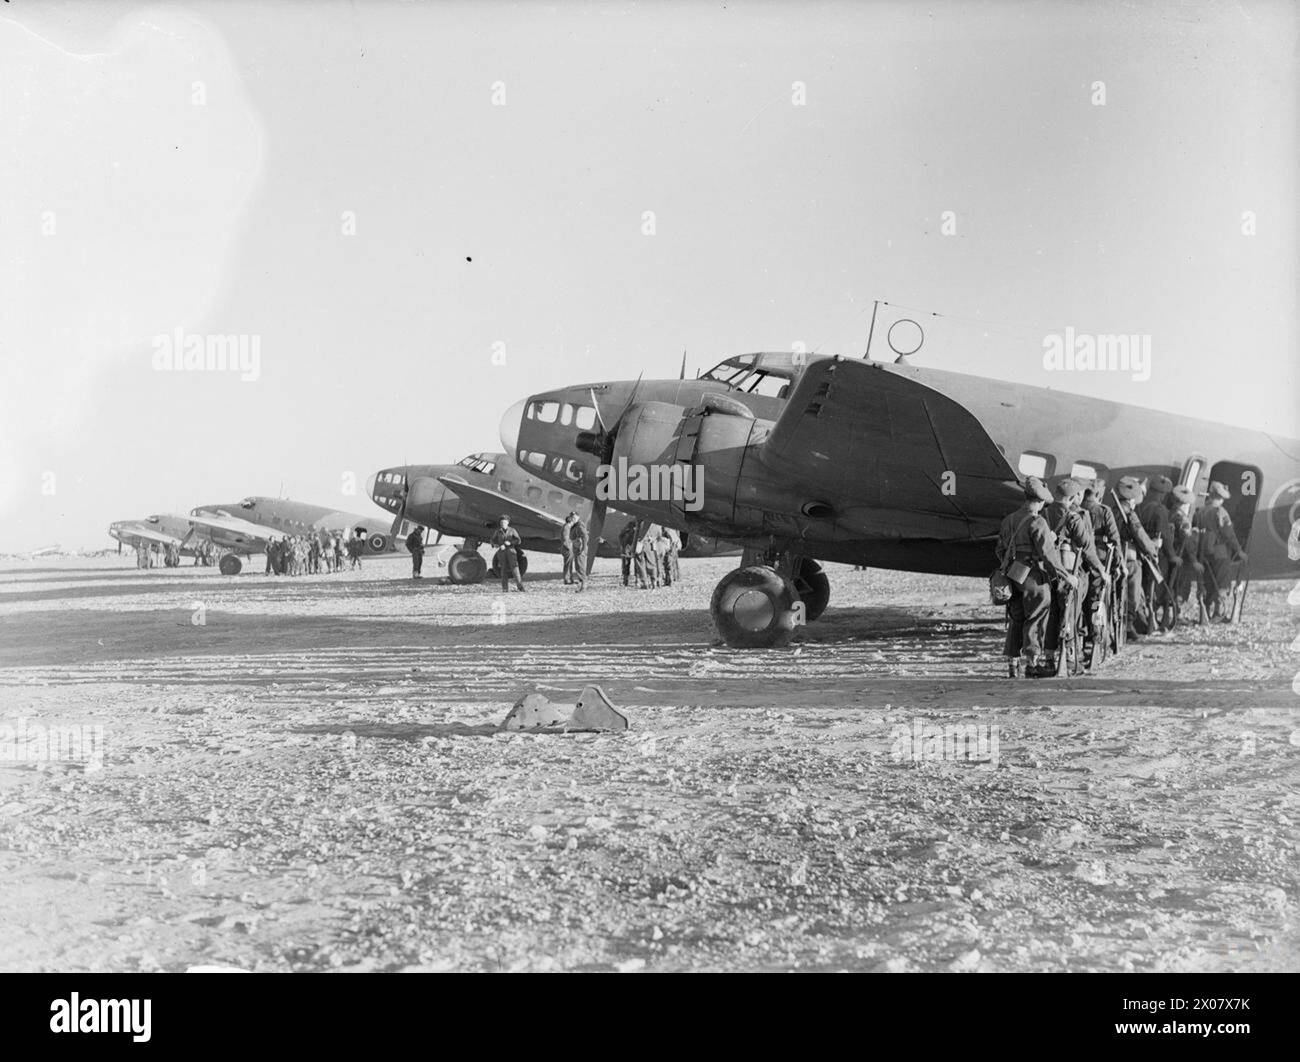 ROYAL AIR FORCE OPERATIONS IN THE MIDDLE EAST AND NORTH AFRICA, 1939-1943. - Soldiers of 5th Battalion the Seaforth Highlanders board Hawker Hudson Mark VIs of No. 267 Squadron RAF at LG 224/Cairo West, Egypt for an Operation HELPFUL flight carrying troops to Castel Benito, Libya  Royal Air Force, Maintenance Unit, 267 Stock Photo